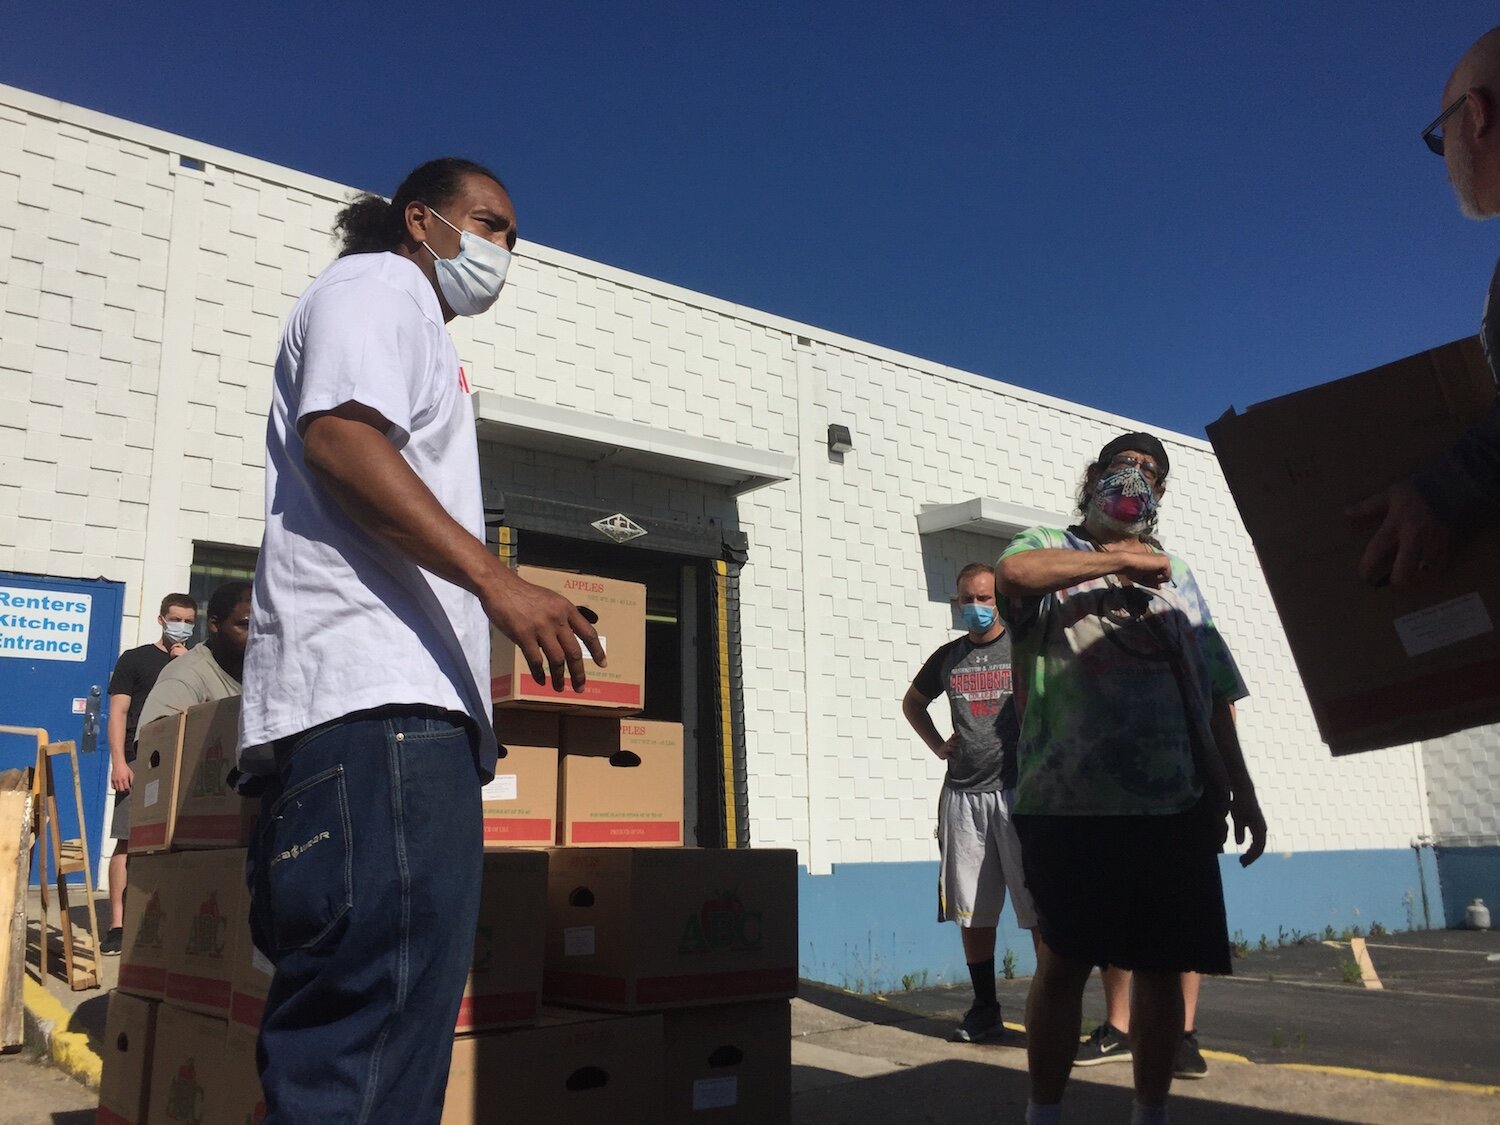 Working together, networks of Black farmers in the Midwest and their volunteers have delivered more than 3 million pounds of food to residents in need during the pandemic.